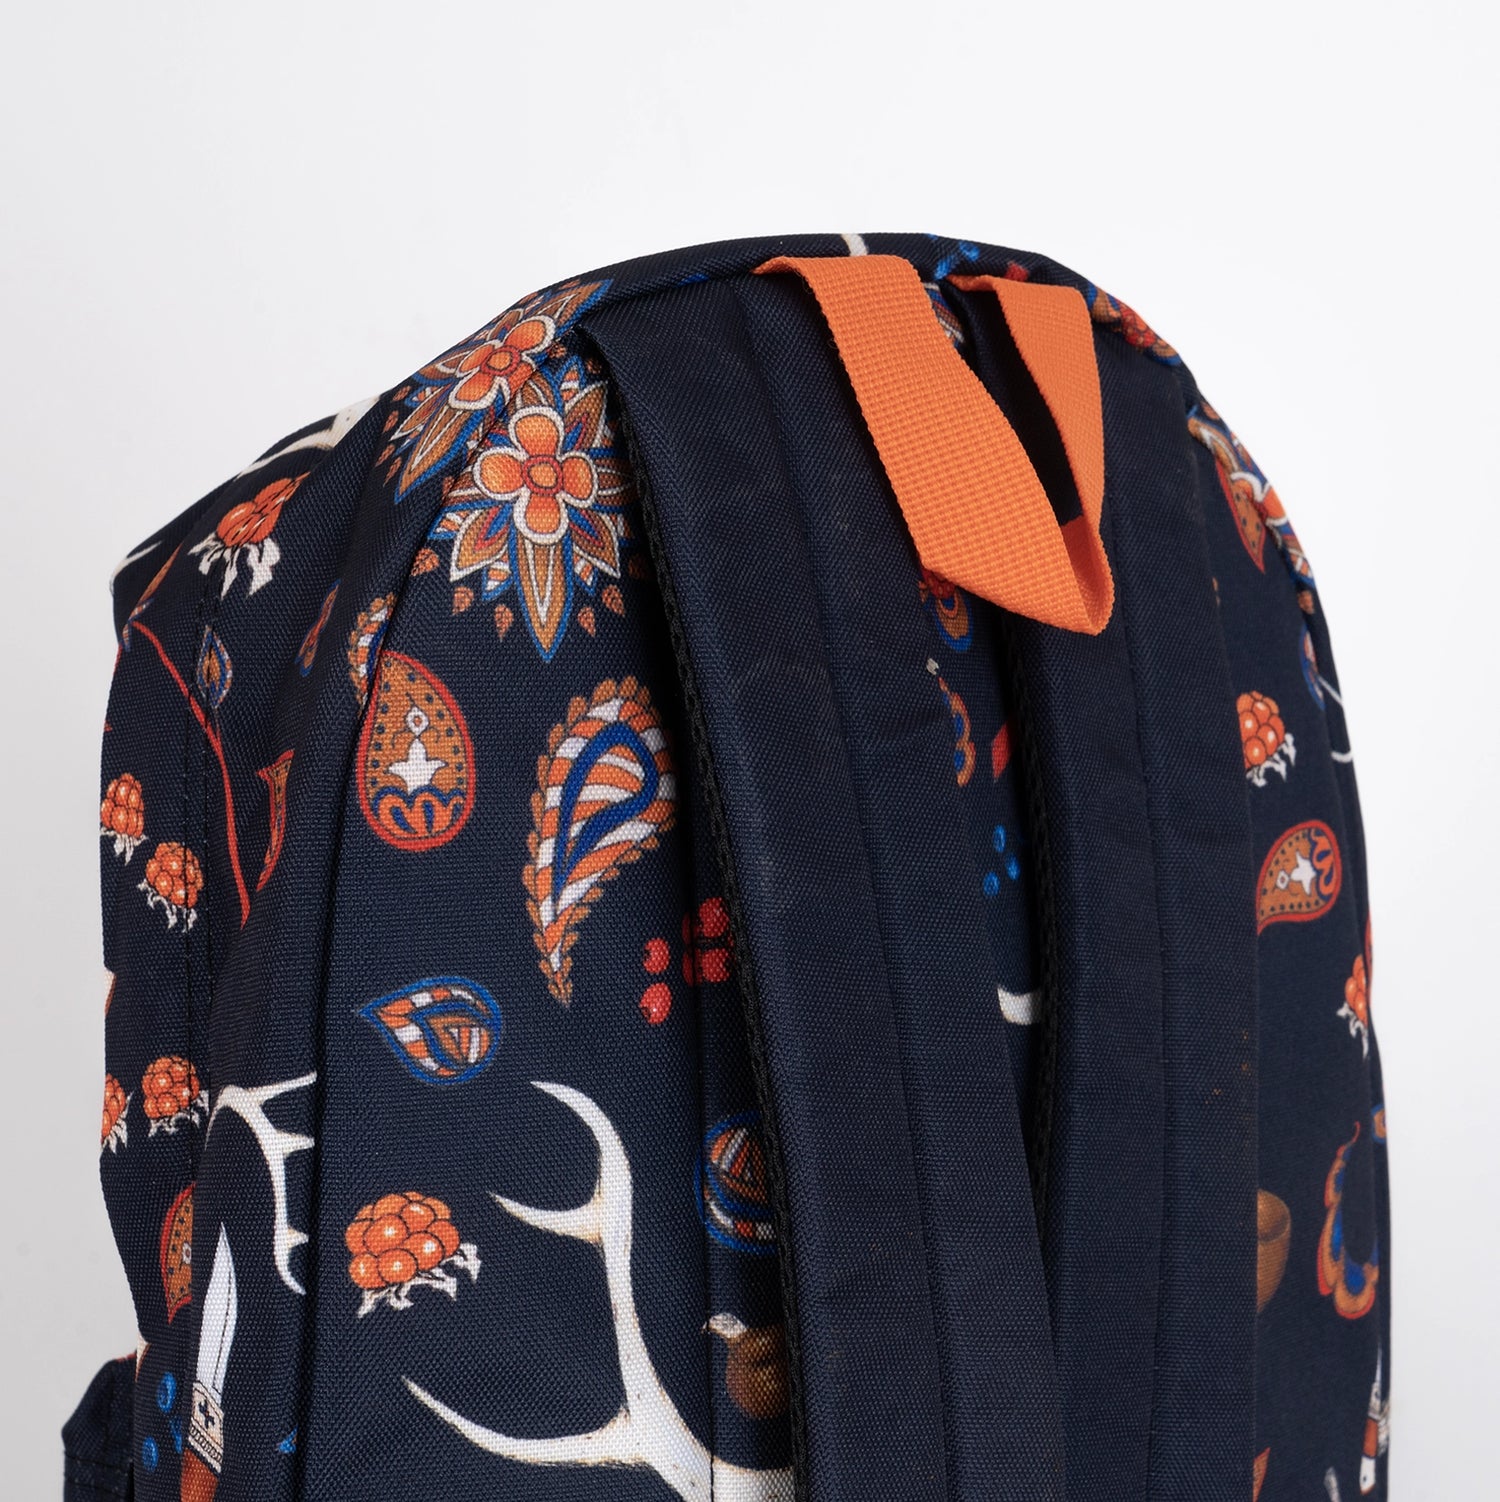 SAPMI BACKPACK - NAVY